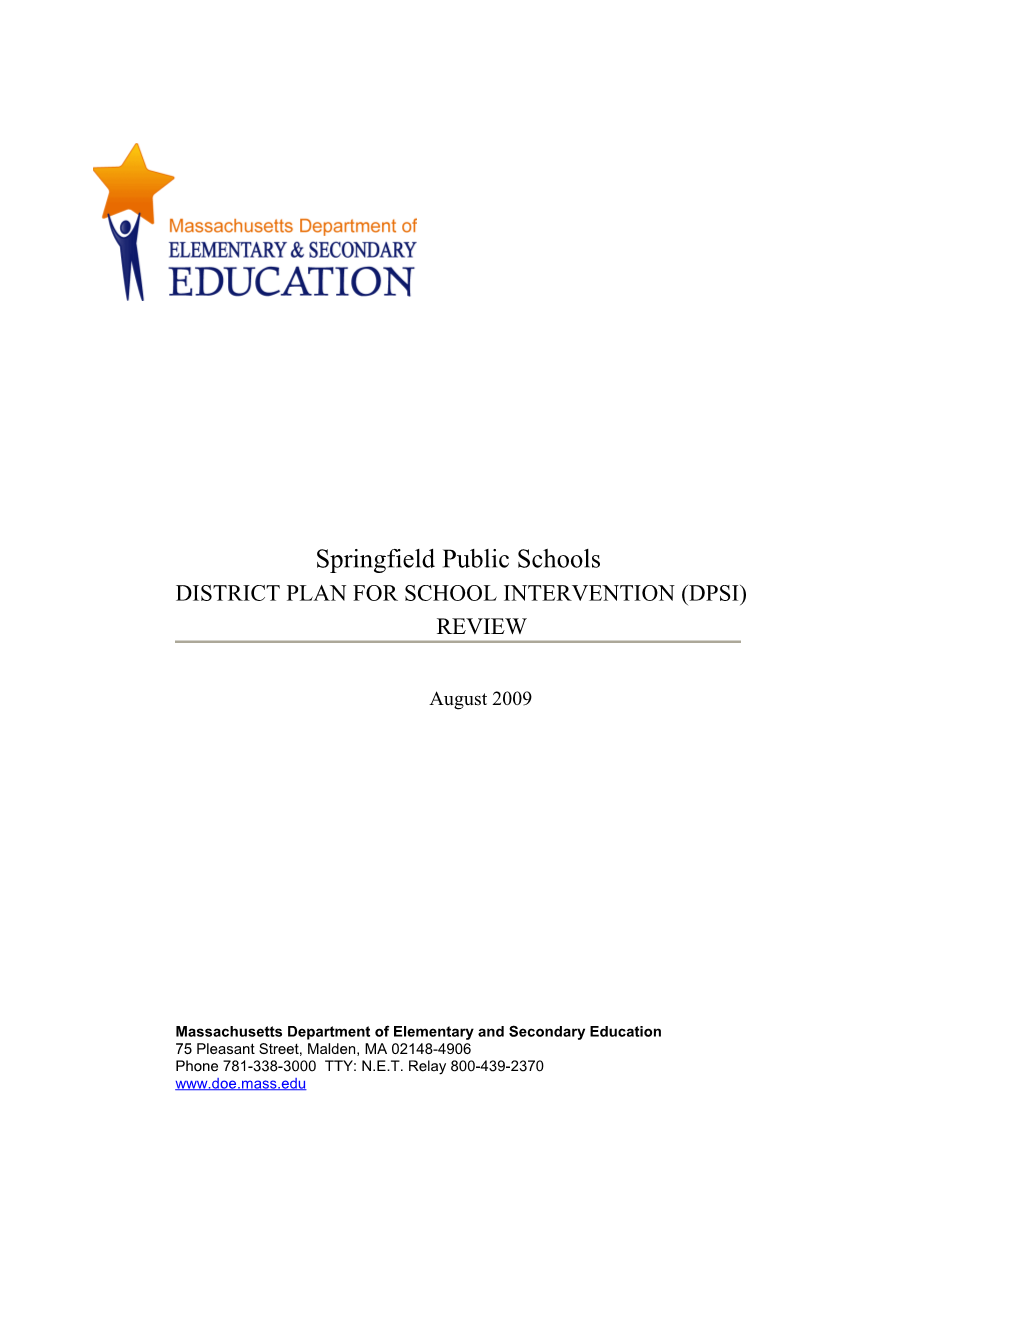 Springfield District Plan for School Intervention Review